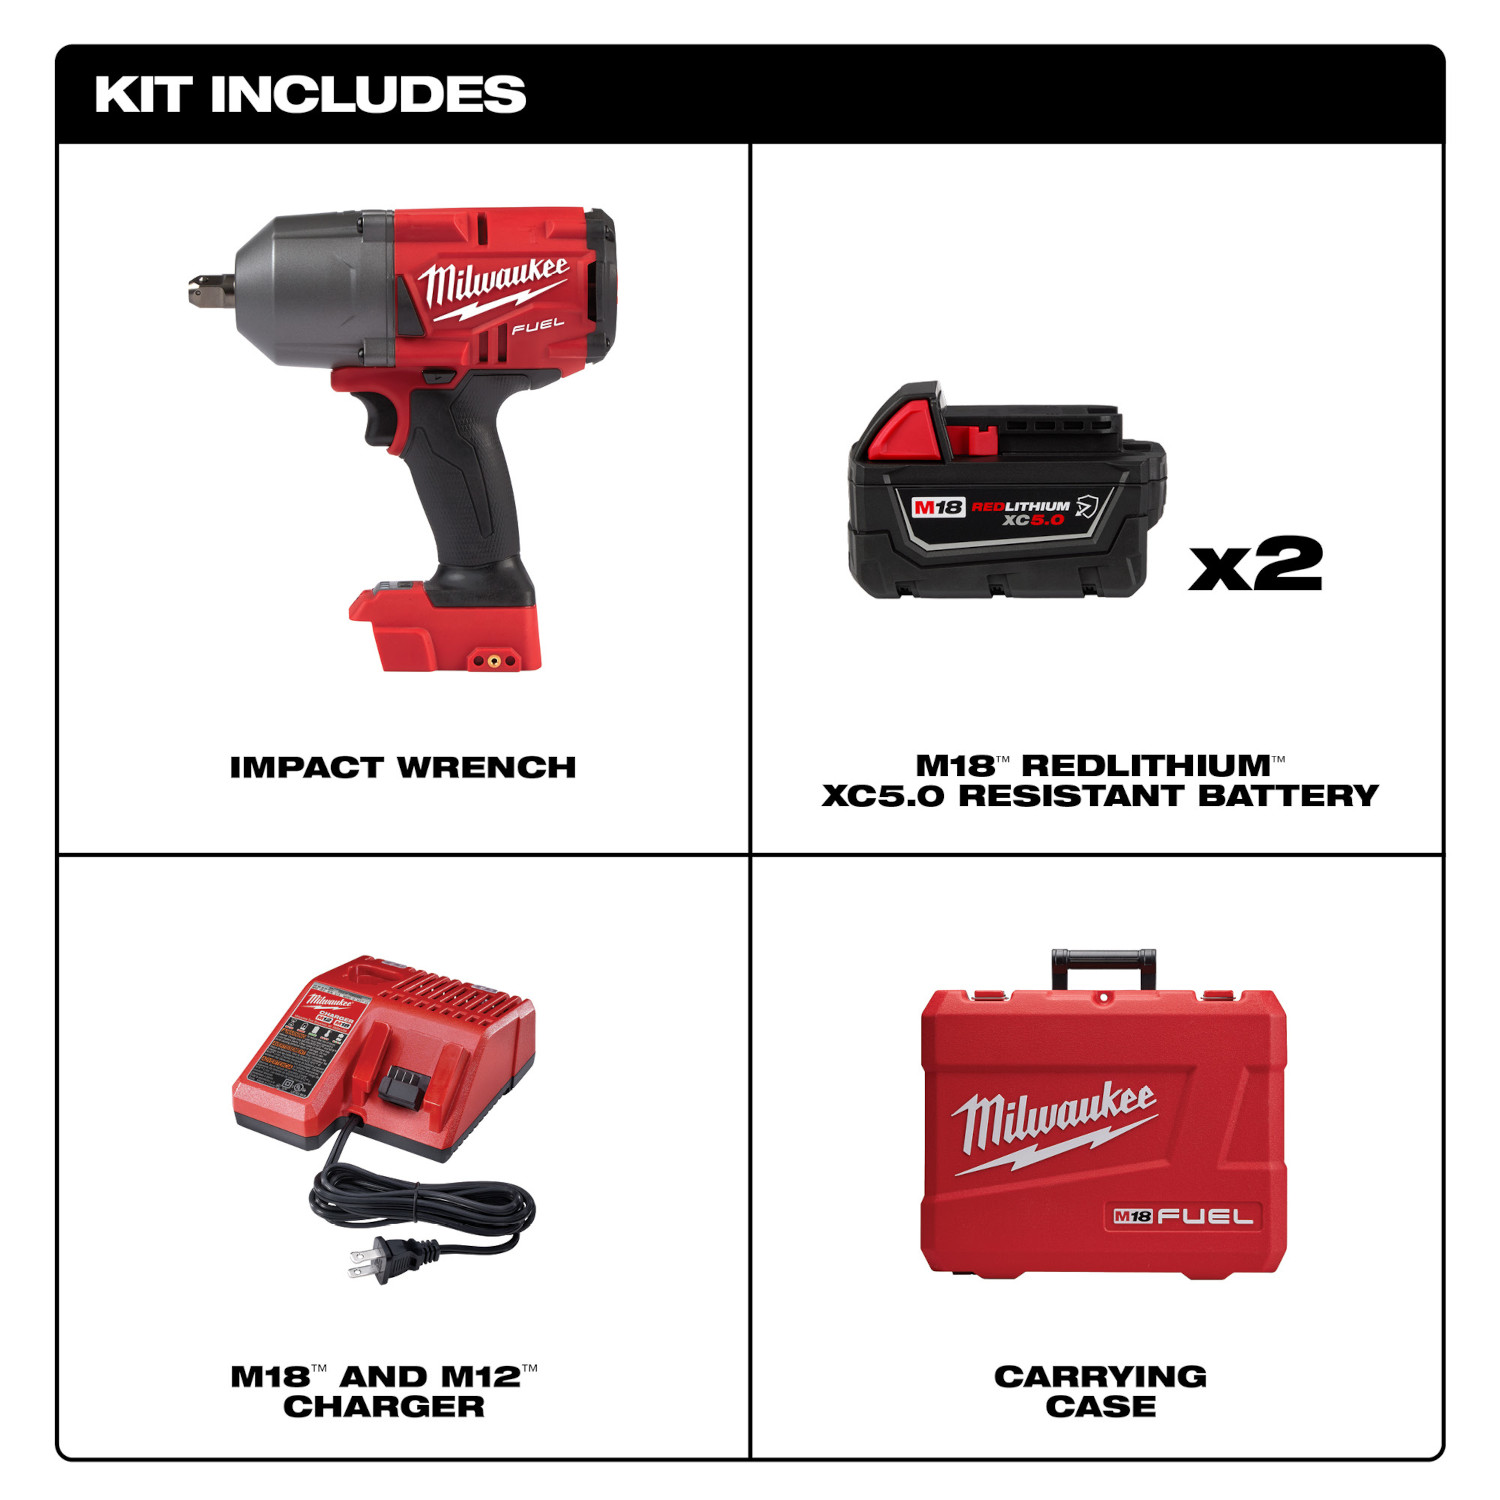 Milwaukee M18 Fuel High Torque 1/2 Inch Impact Wrench with Pin Detent Kit from Columbia Safety